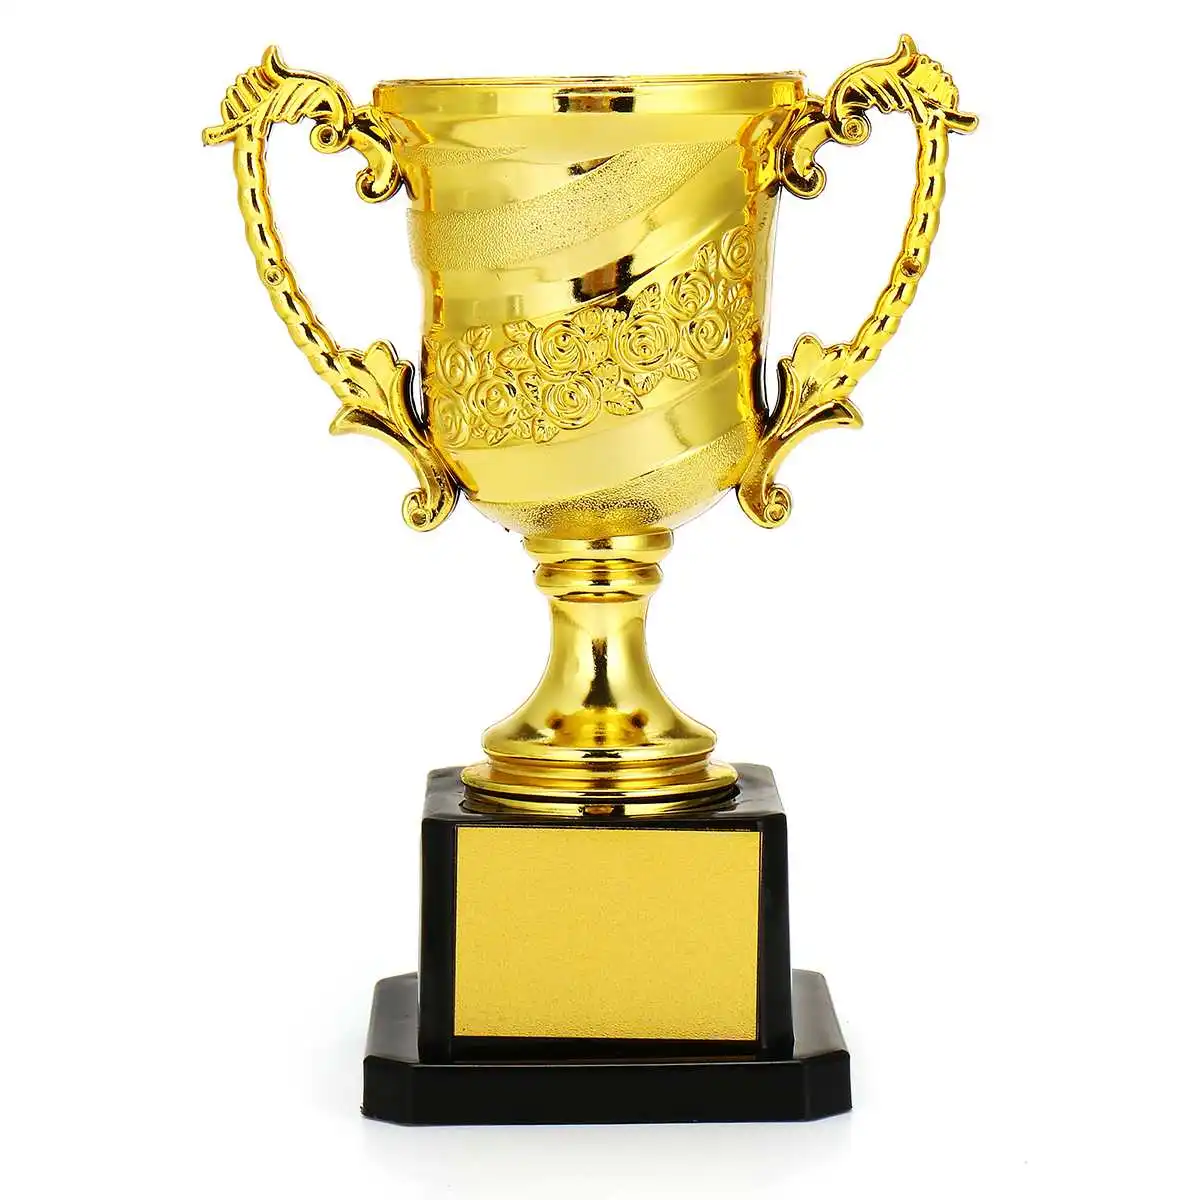 Go Kart Resin Trophy  15.5 cm Free Engraving up to 30 Letters SALE 